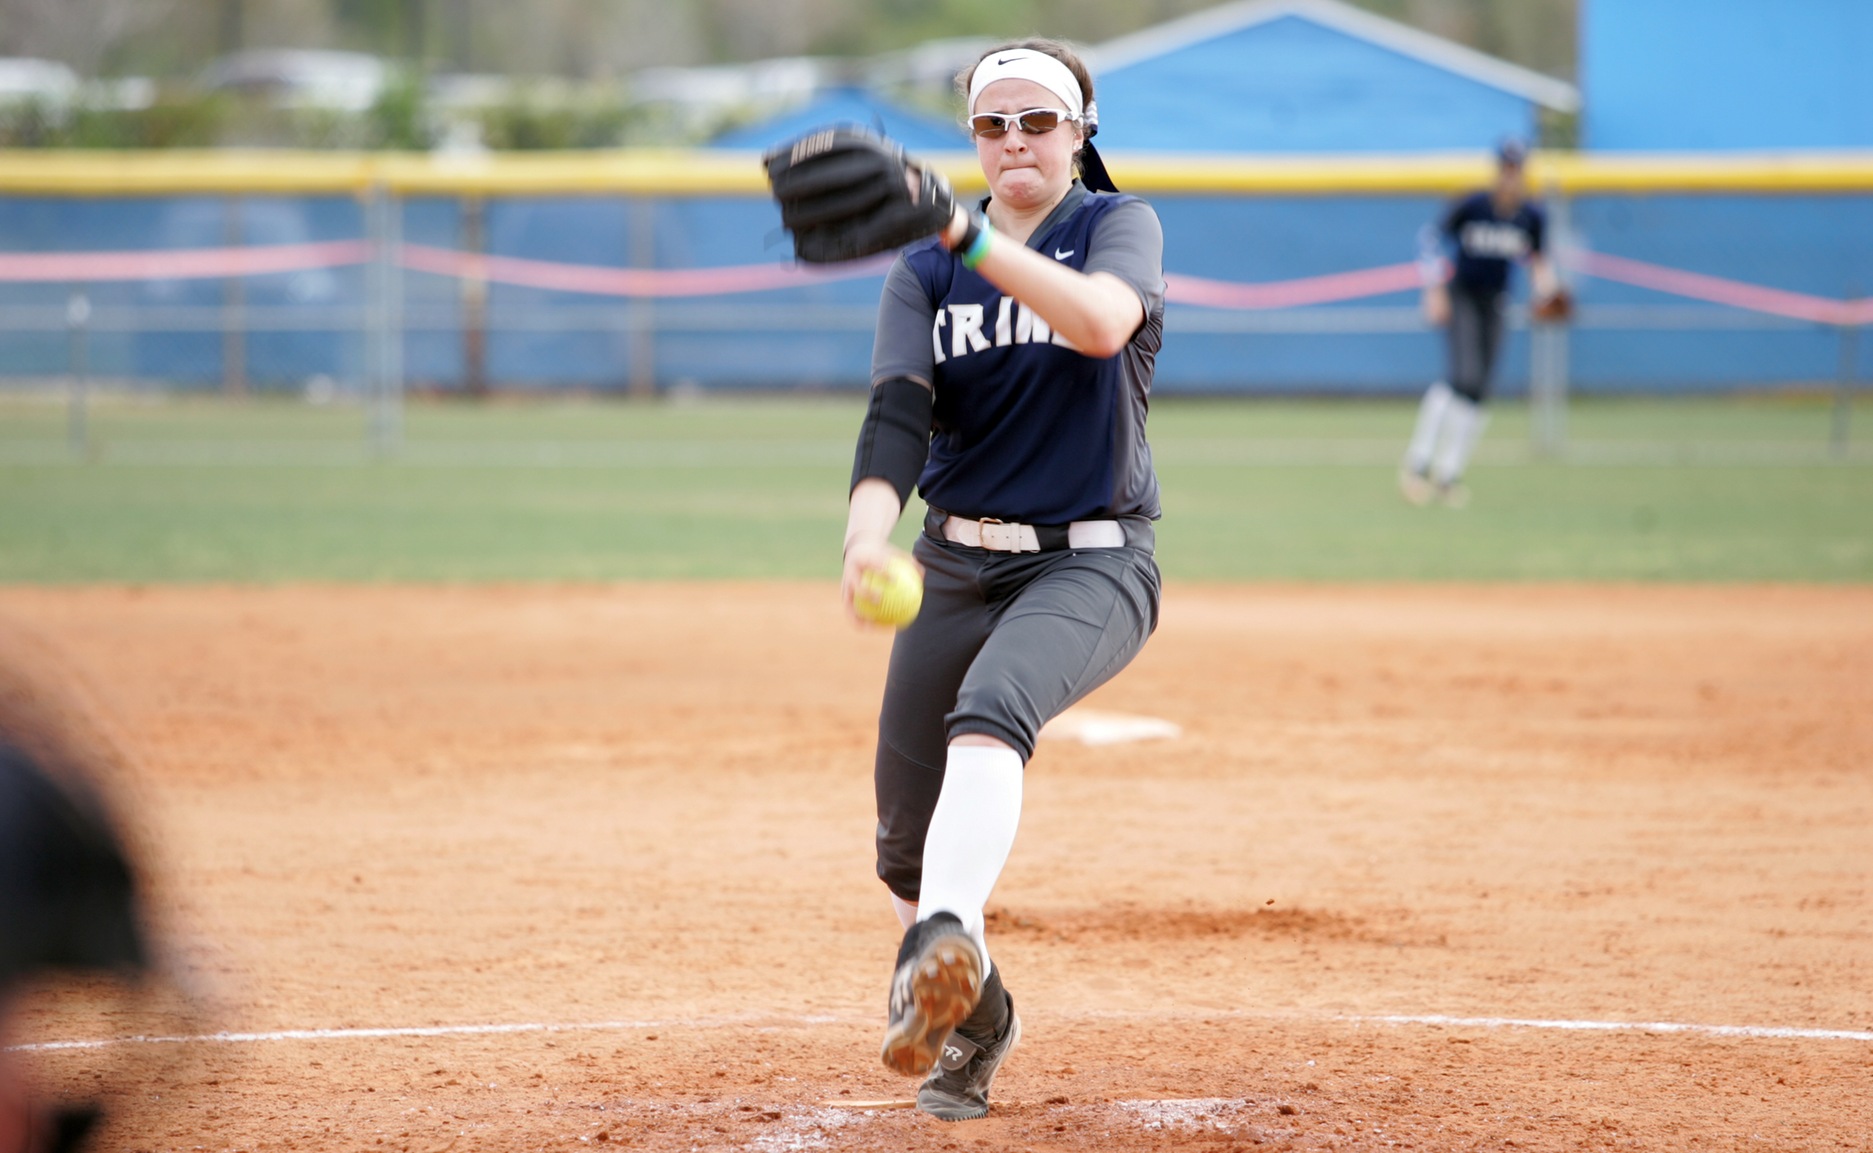 Ray Named MIAA Pitcher of the Week